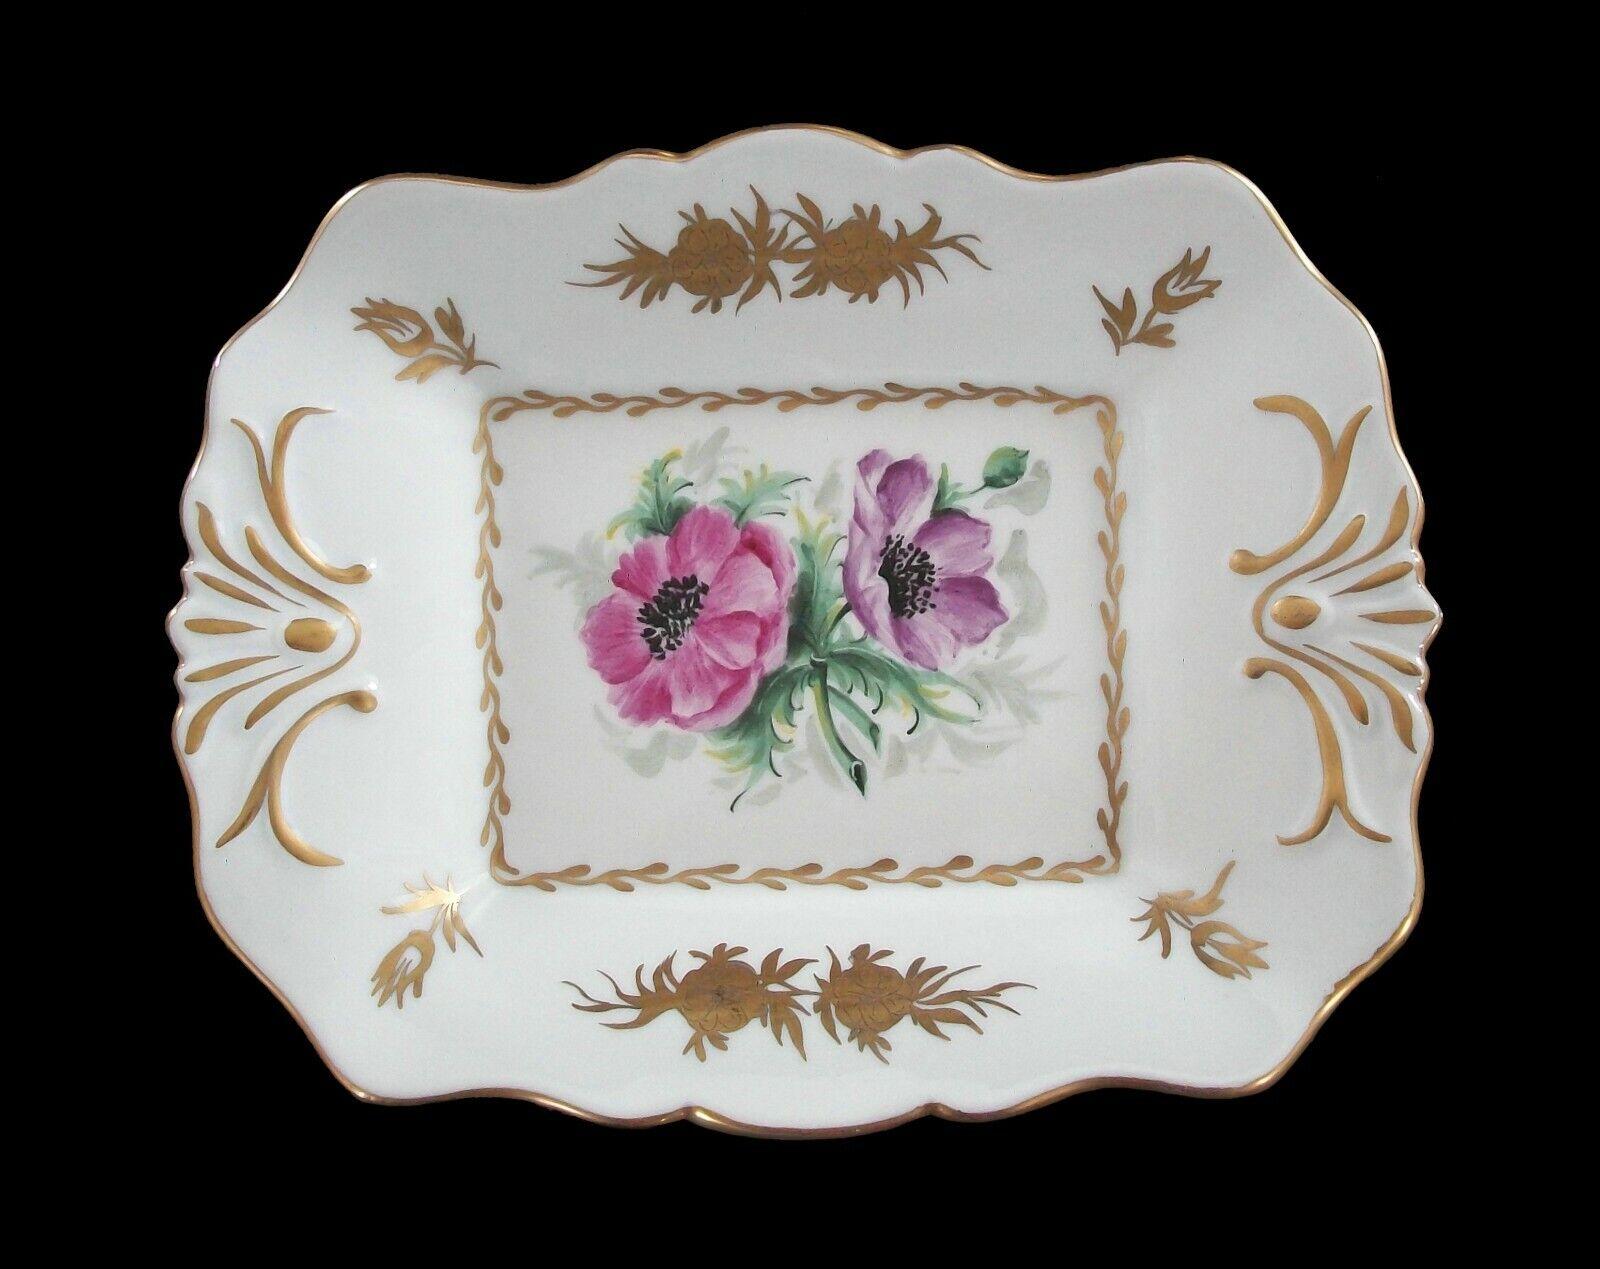 Aitco- Fine vintage Limoges ceramic cabinet tray - hand painted with Poppies to the center - gilded floral border and handles - signed on the back - France - mid 20th century.

Excellent antique condition - no loss - no damage - no restoration -